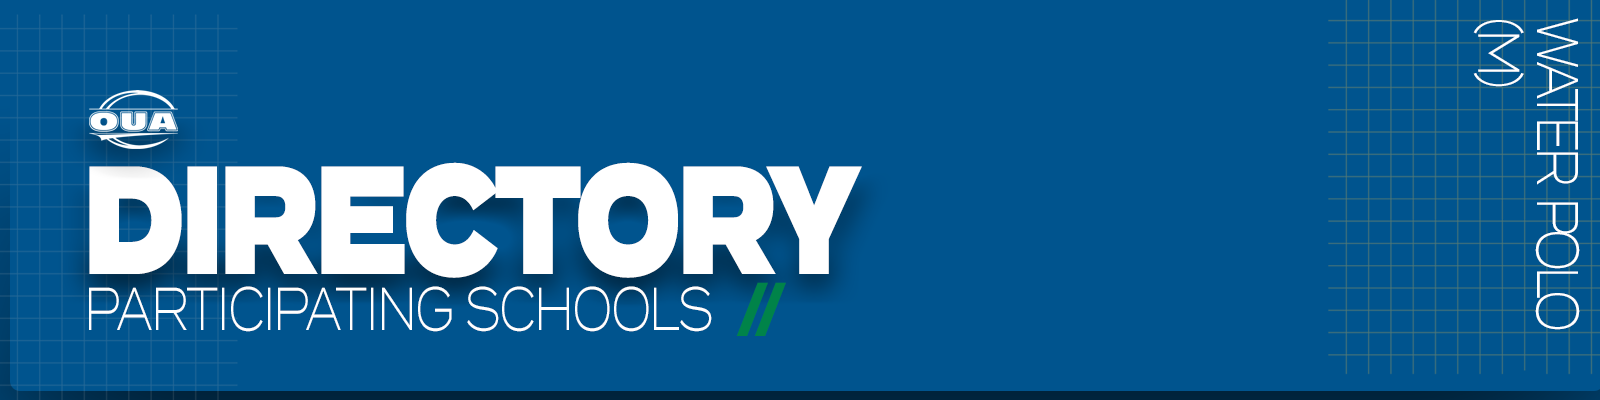 Predominantly blue graphic with large white text on the left side that reads 'Directory, Participating Schools' and small white vertical text on the right side that reads 'Water Polo'